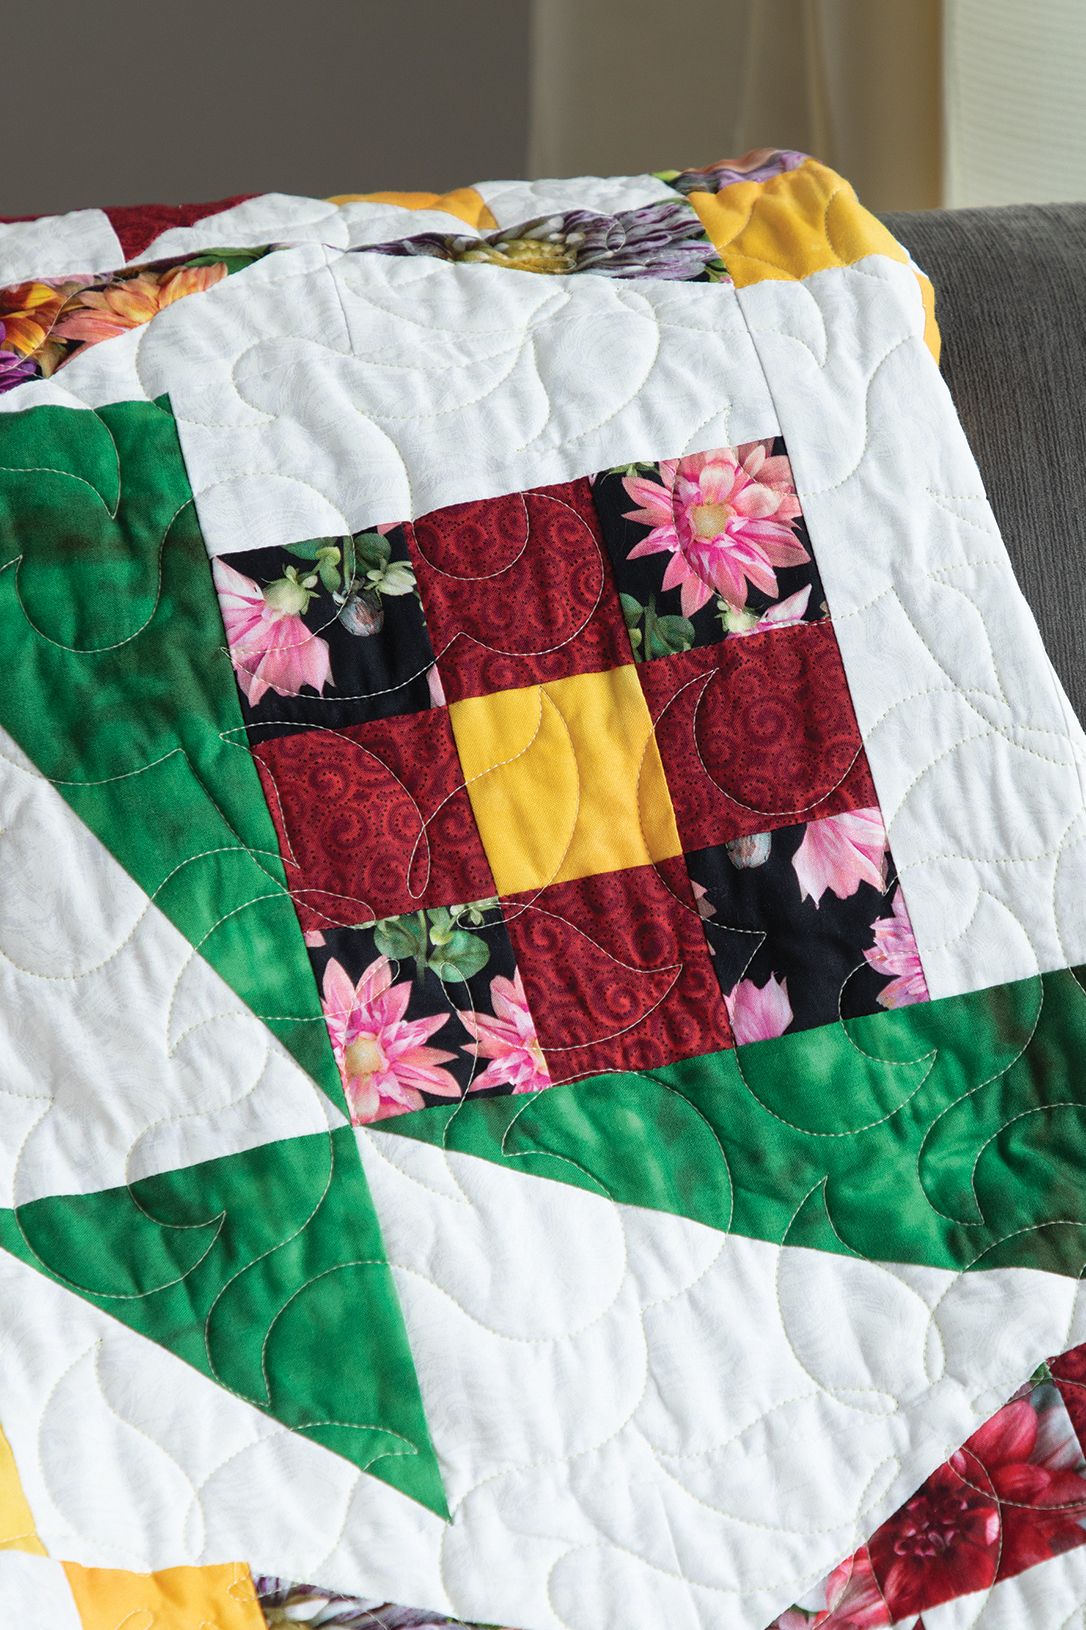 Winter Fraulein quilt in Liberty Cottons - Diary of a Quilter